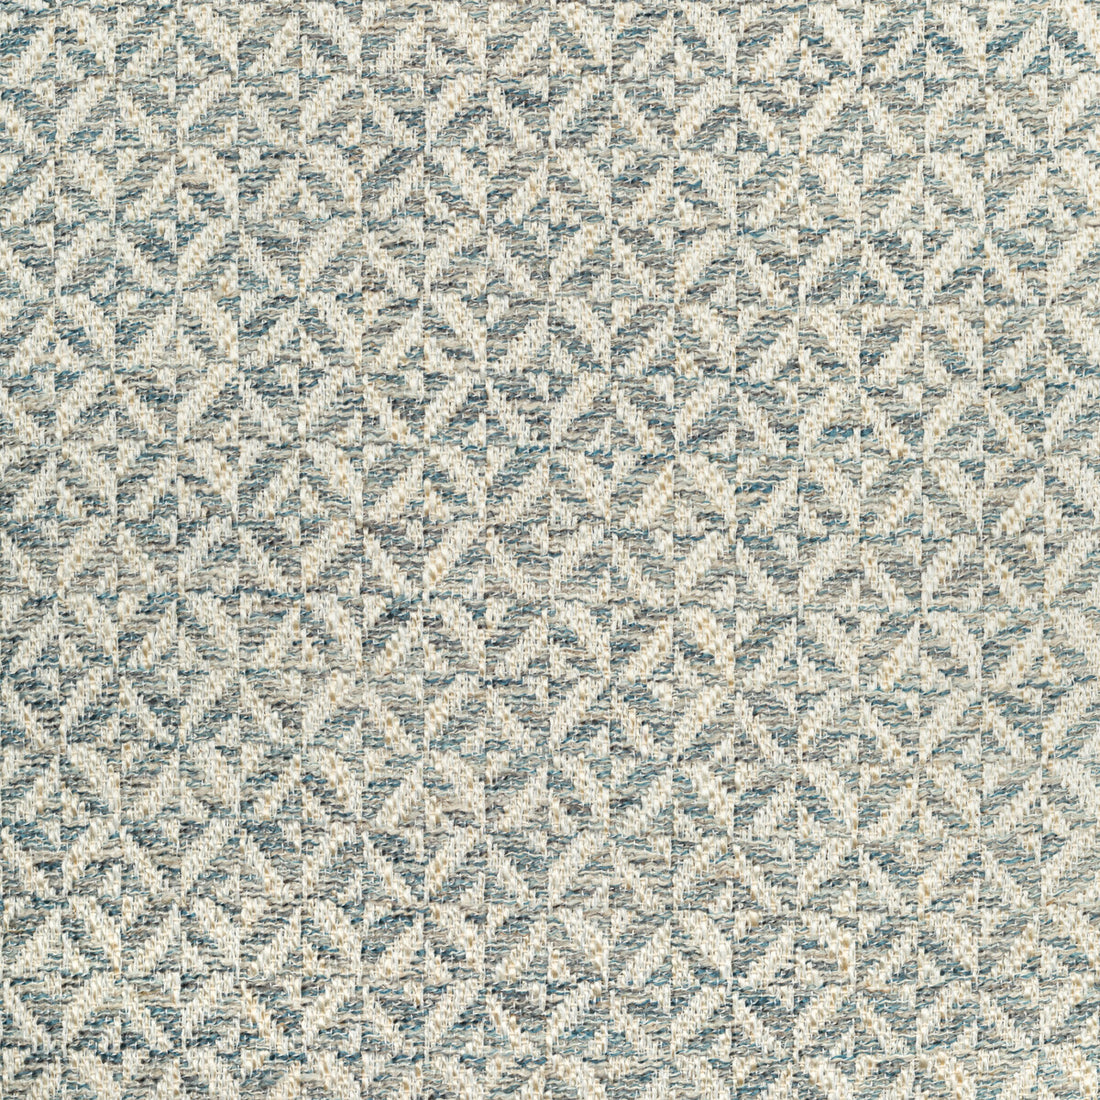 Triana Weave fabric in sky color - pattern 2021105.15.0 - by Lee Jofa in the Triana Weaves collection